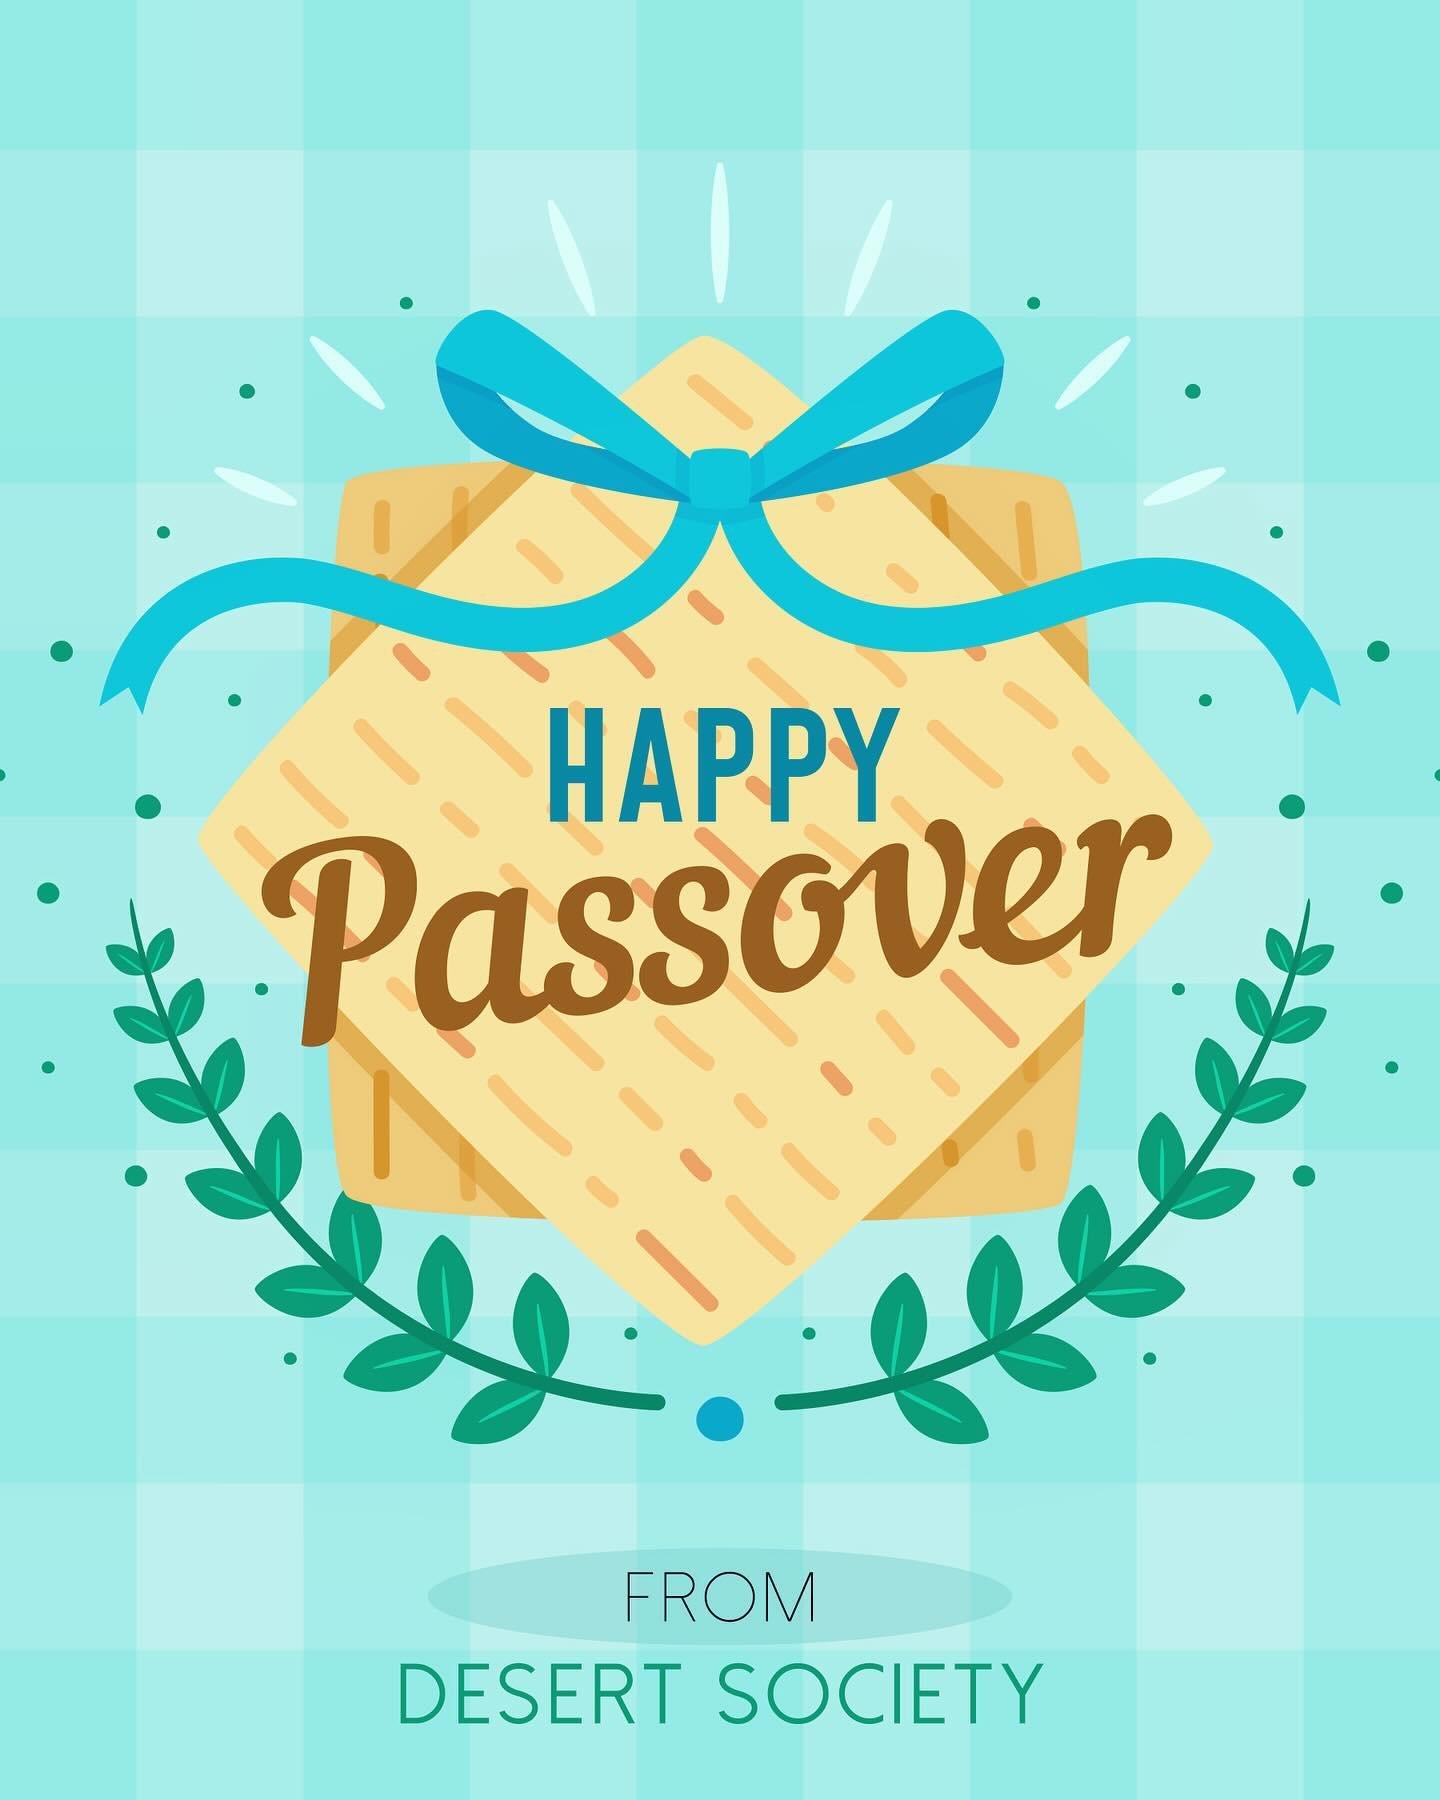 Wishing all our Jewish friends, family and clients a joyous Passover 🫓